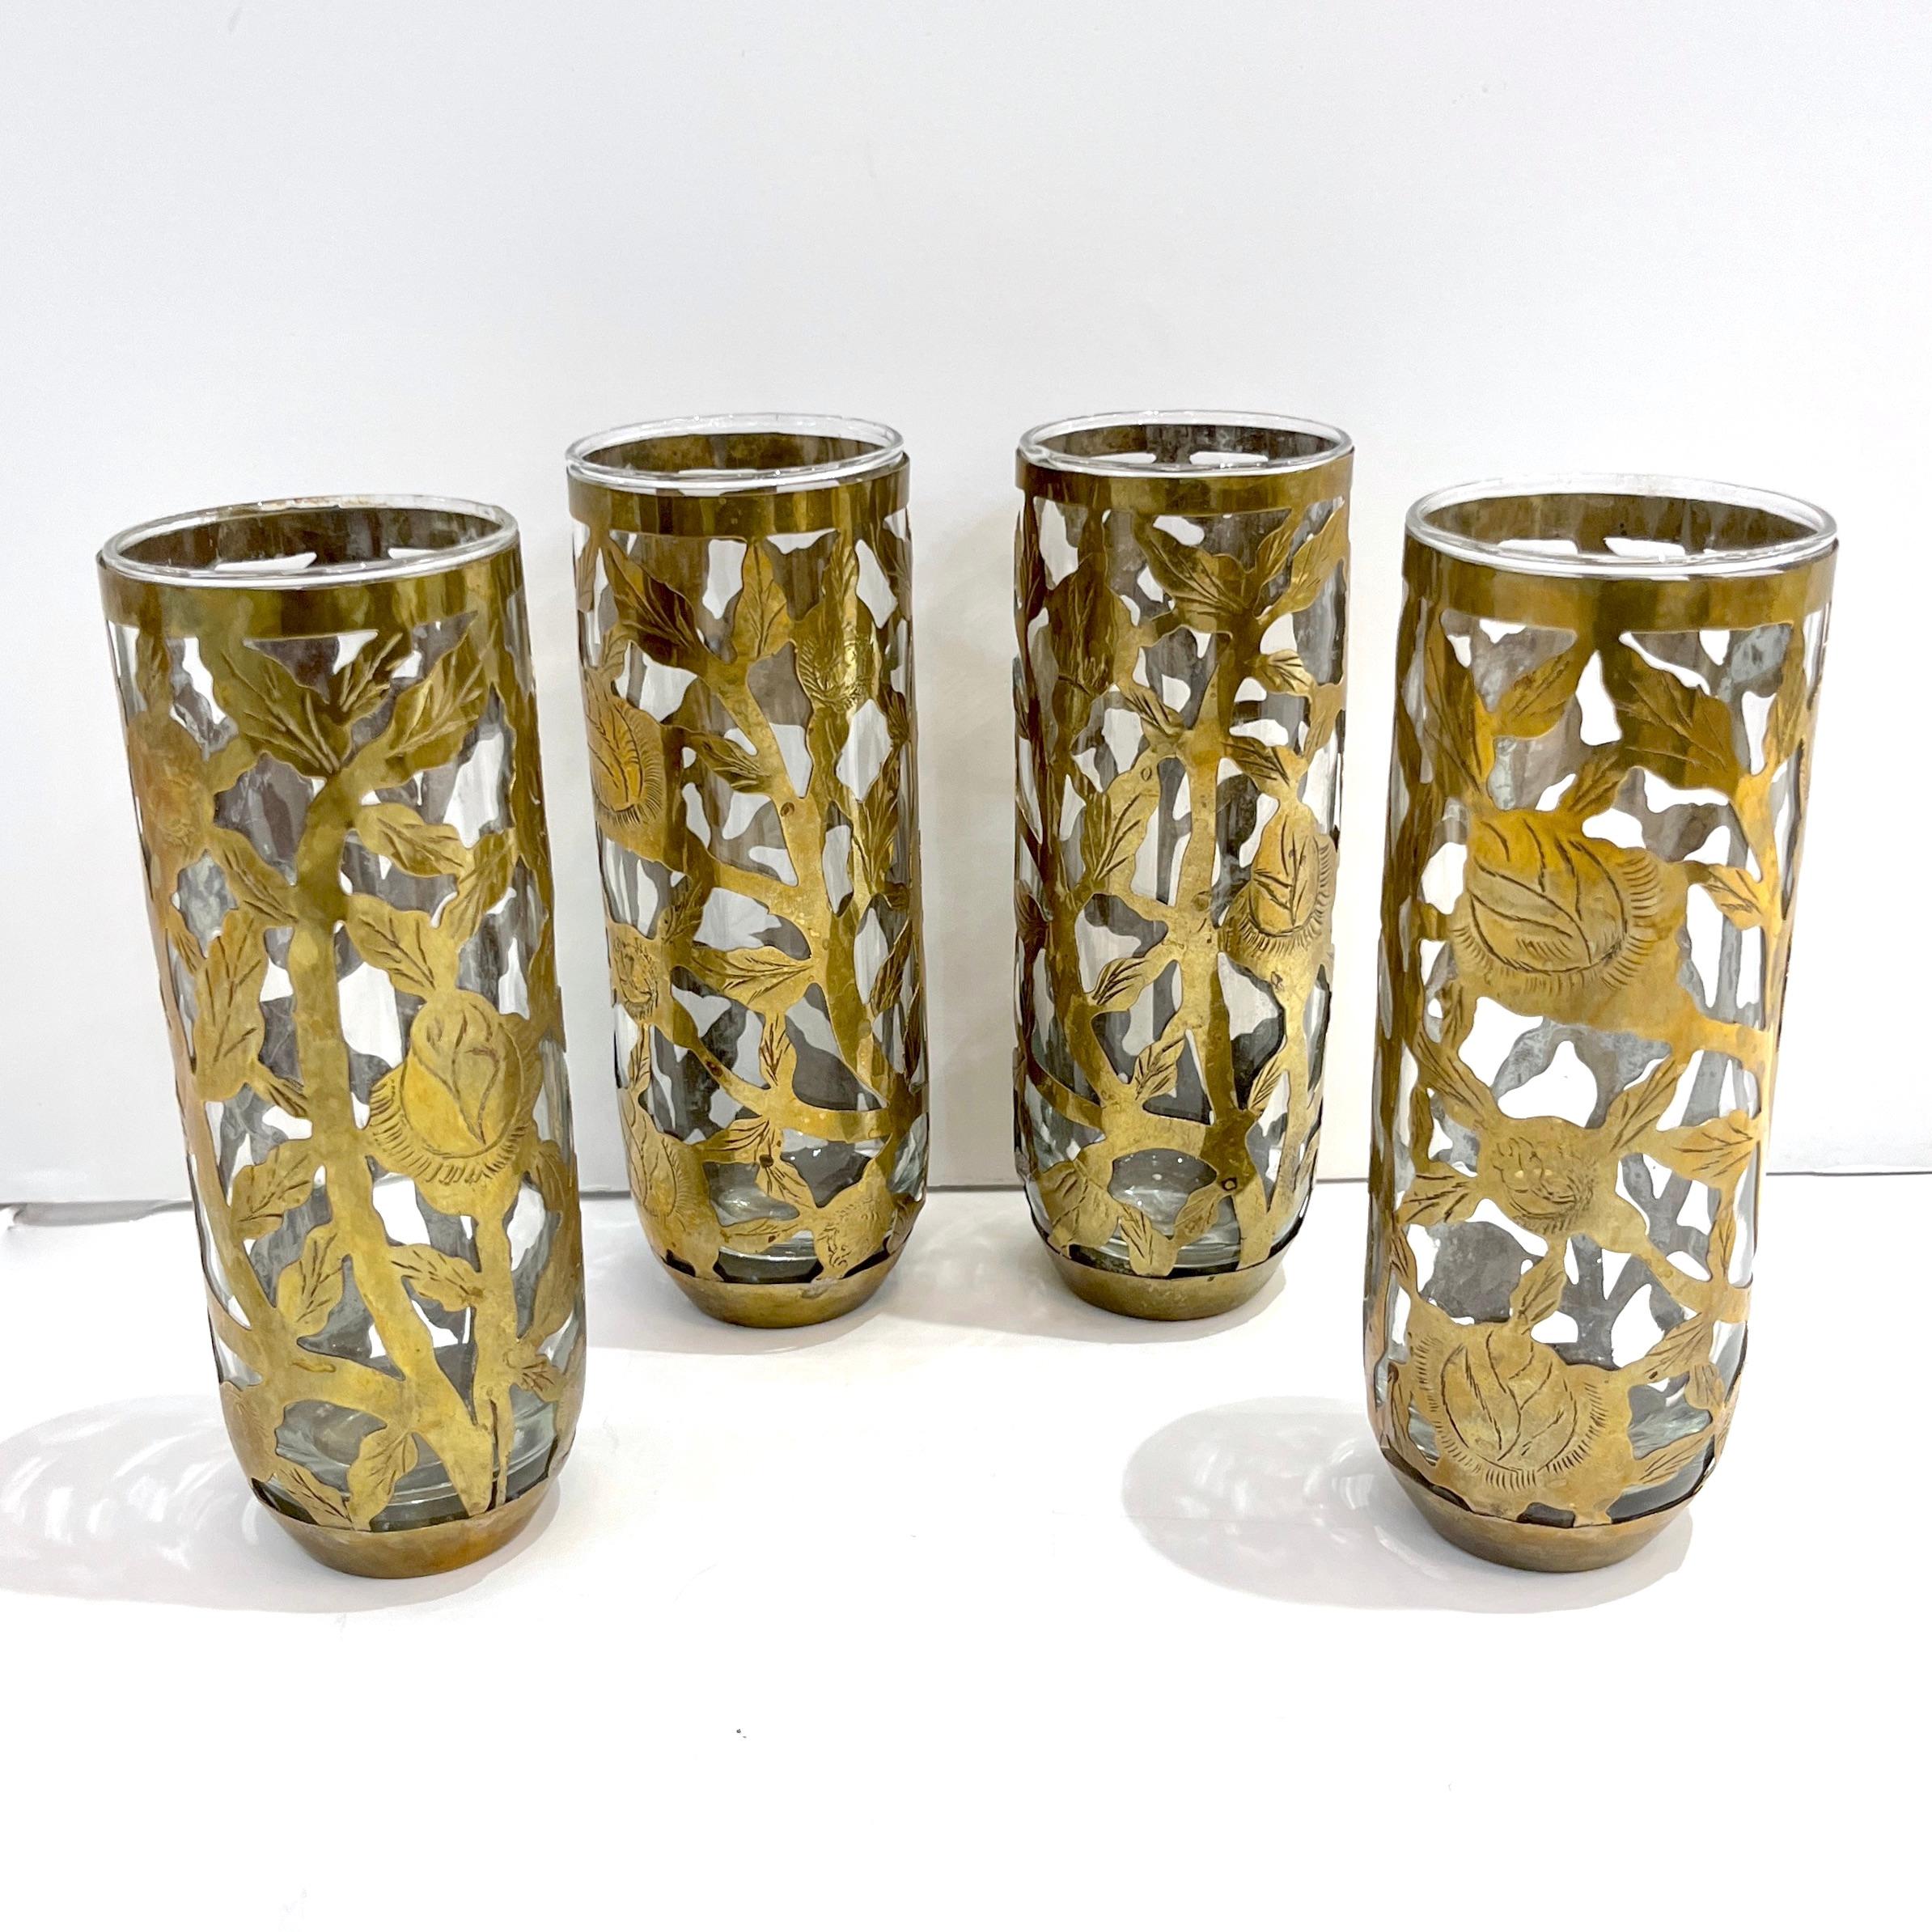 1960 Mexican Set 4 Drinking Glasses Encased in Etched Cutwork Floral Brass Decor For Sale 10